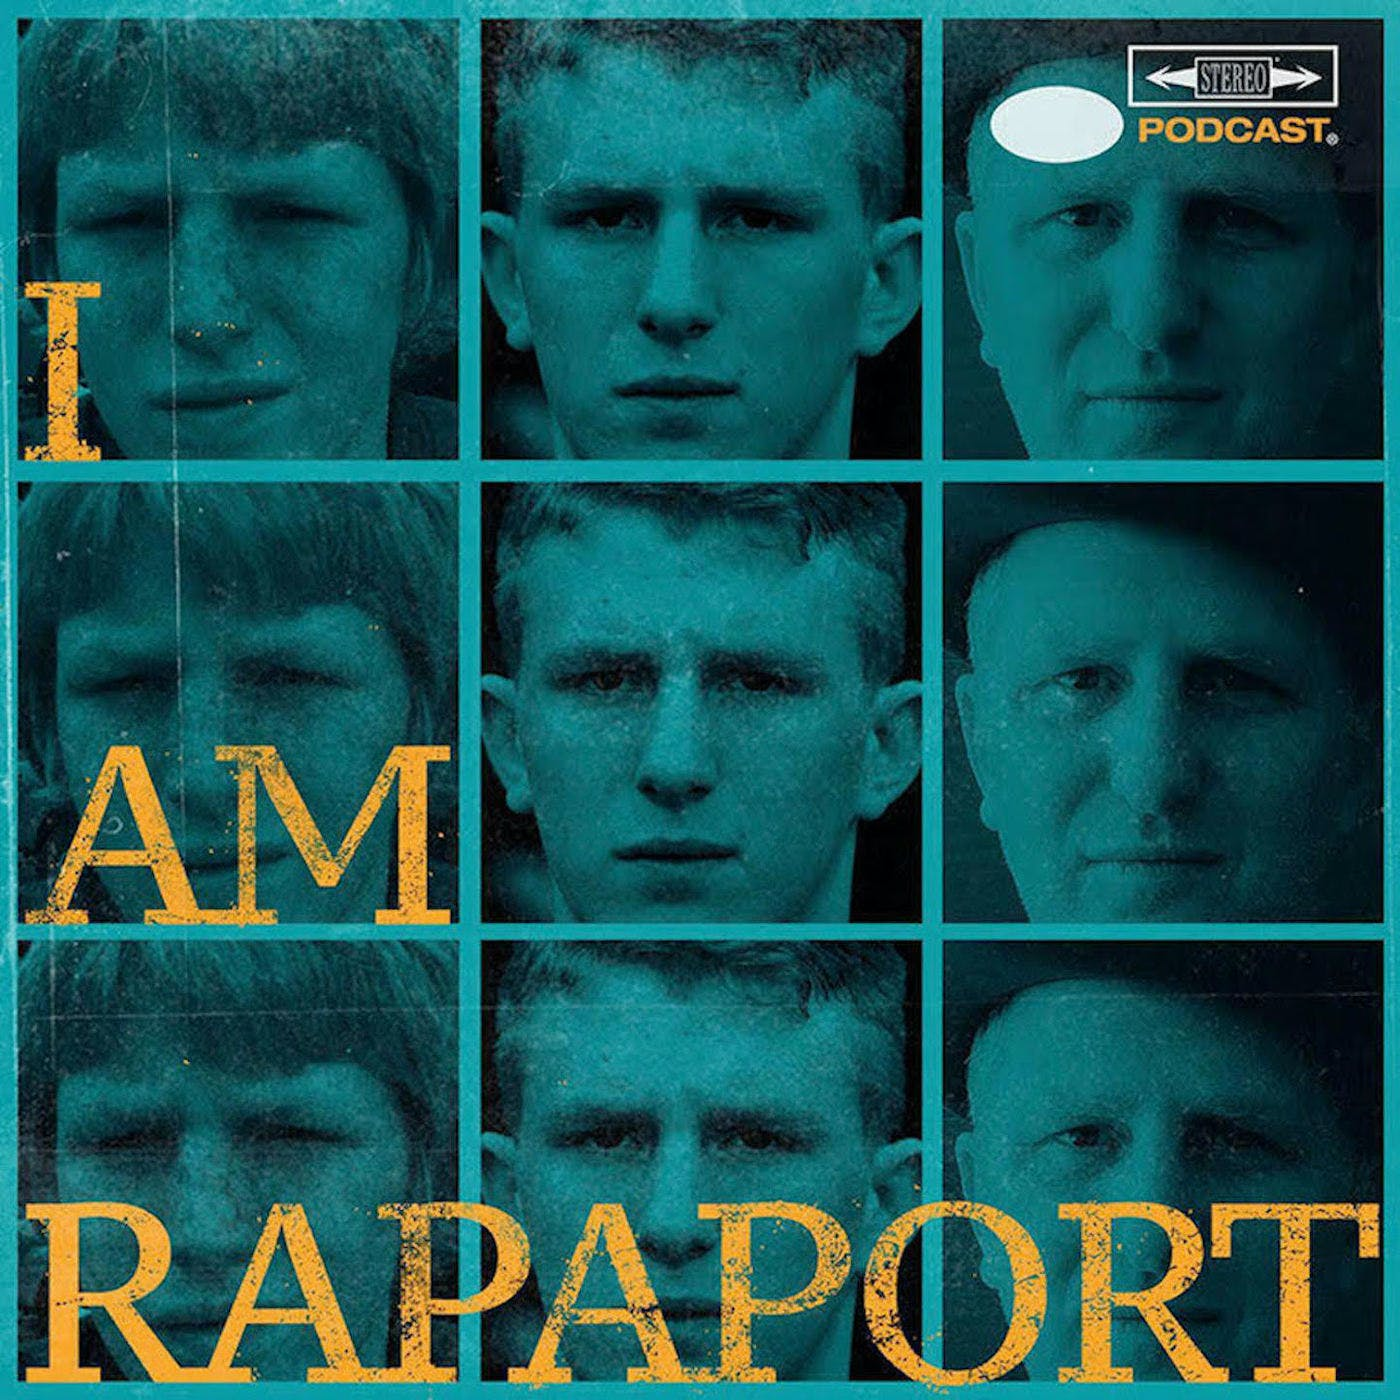 EP 94 - AIELLO/LAMAR ODOM/THE SYNDROME/THE STARTERS/I AM RAPAPORT ACTOR WISHLIST/OH SKEETER/ALL LOAFS MATTER/WOMEN'S HYGENE/GUYS WE F****D POD